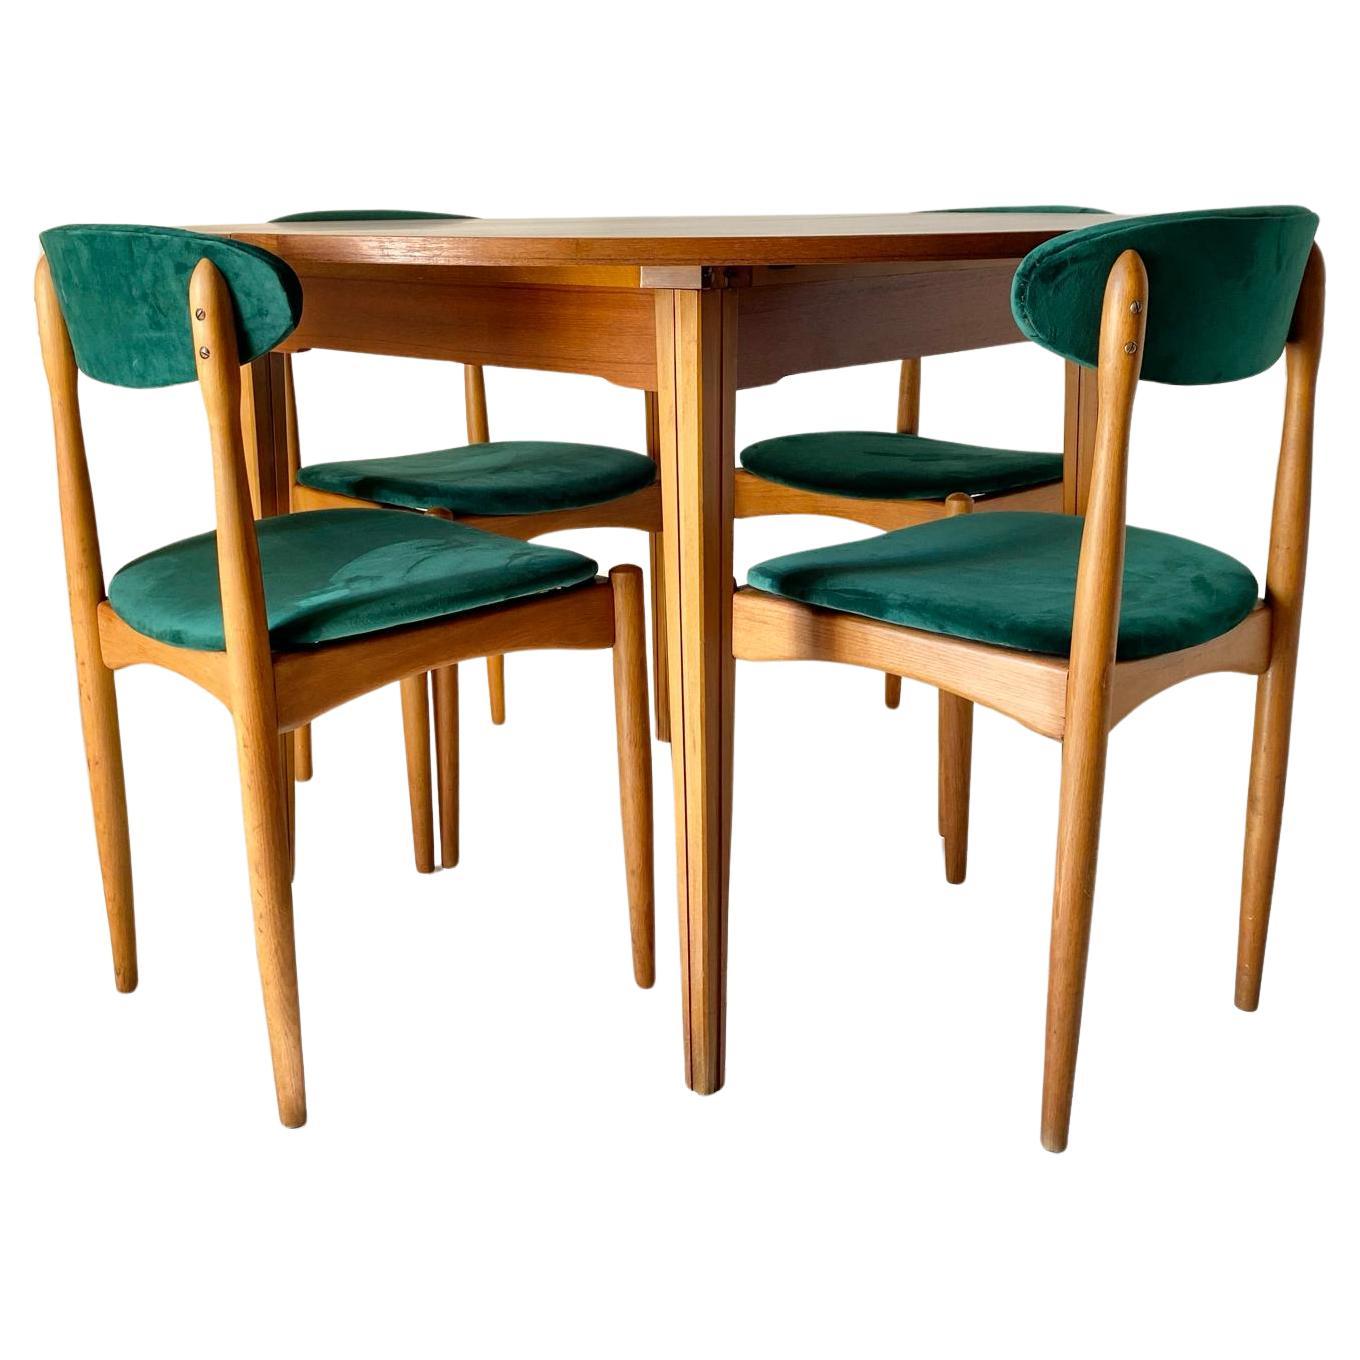 Scandinavian Mid Century Modern Dining Set designed in the Style of Halas. Manufactured in Italy in the 1960 's. The set is made of four beautiful dining chairs in solid beech wood with green fabric seats and a round beech table with solid wood